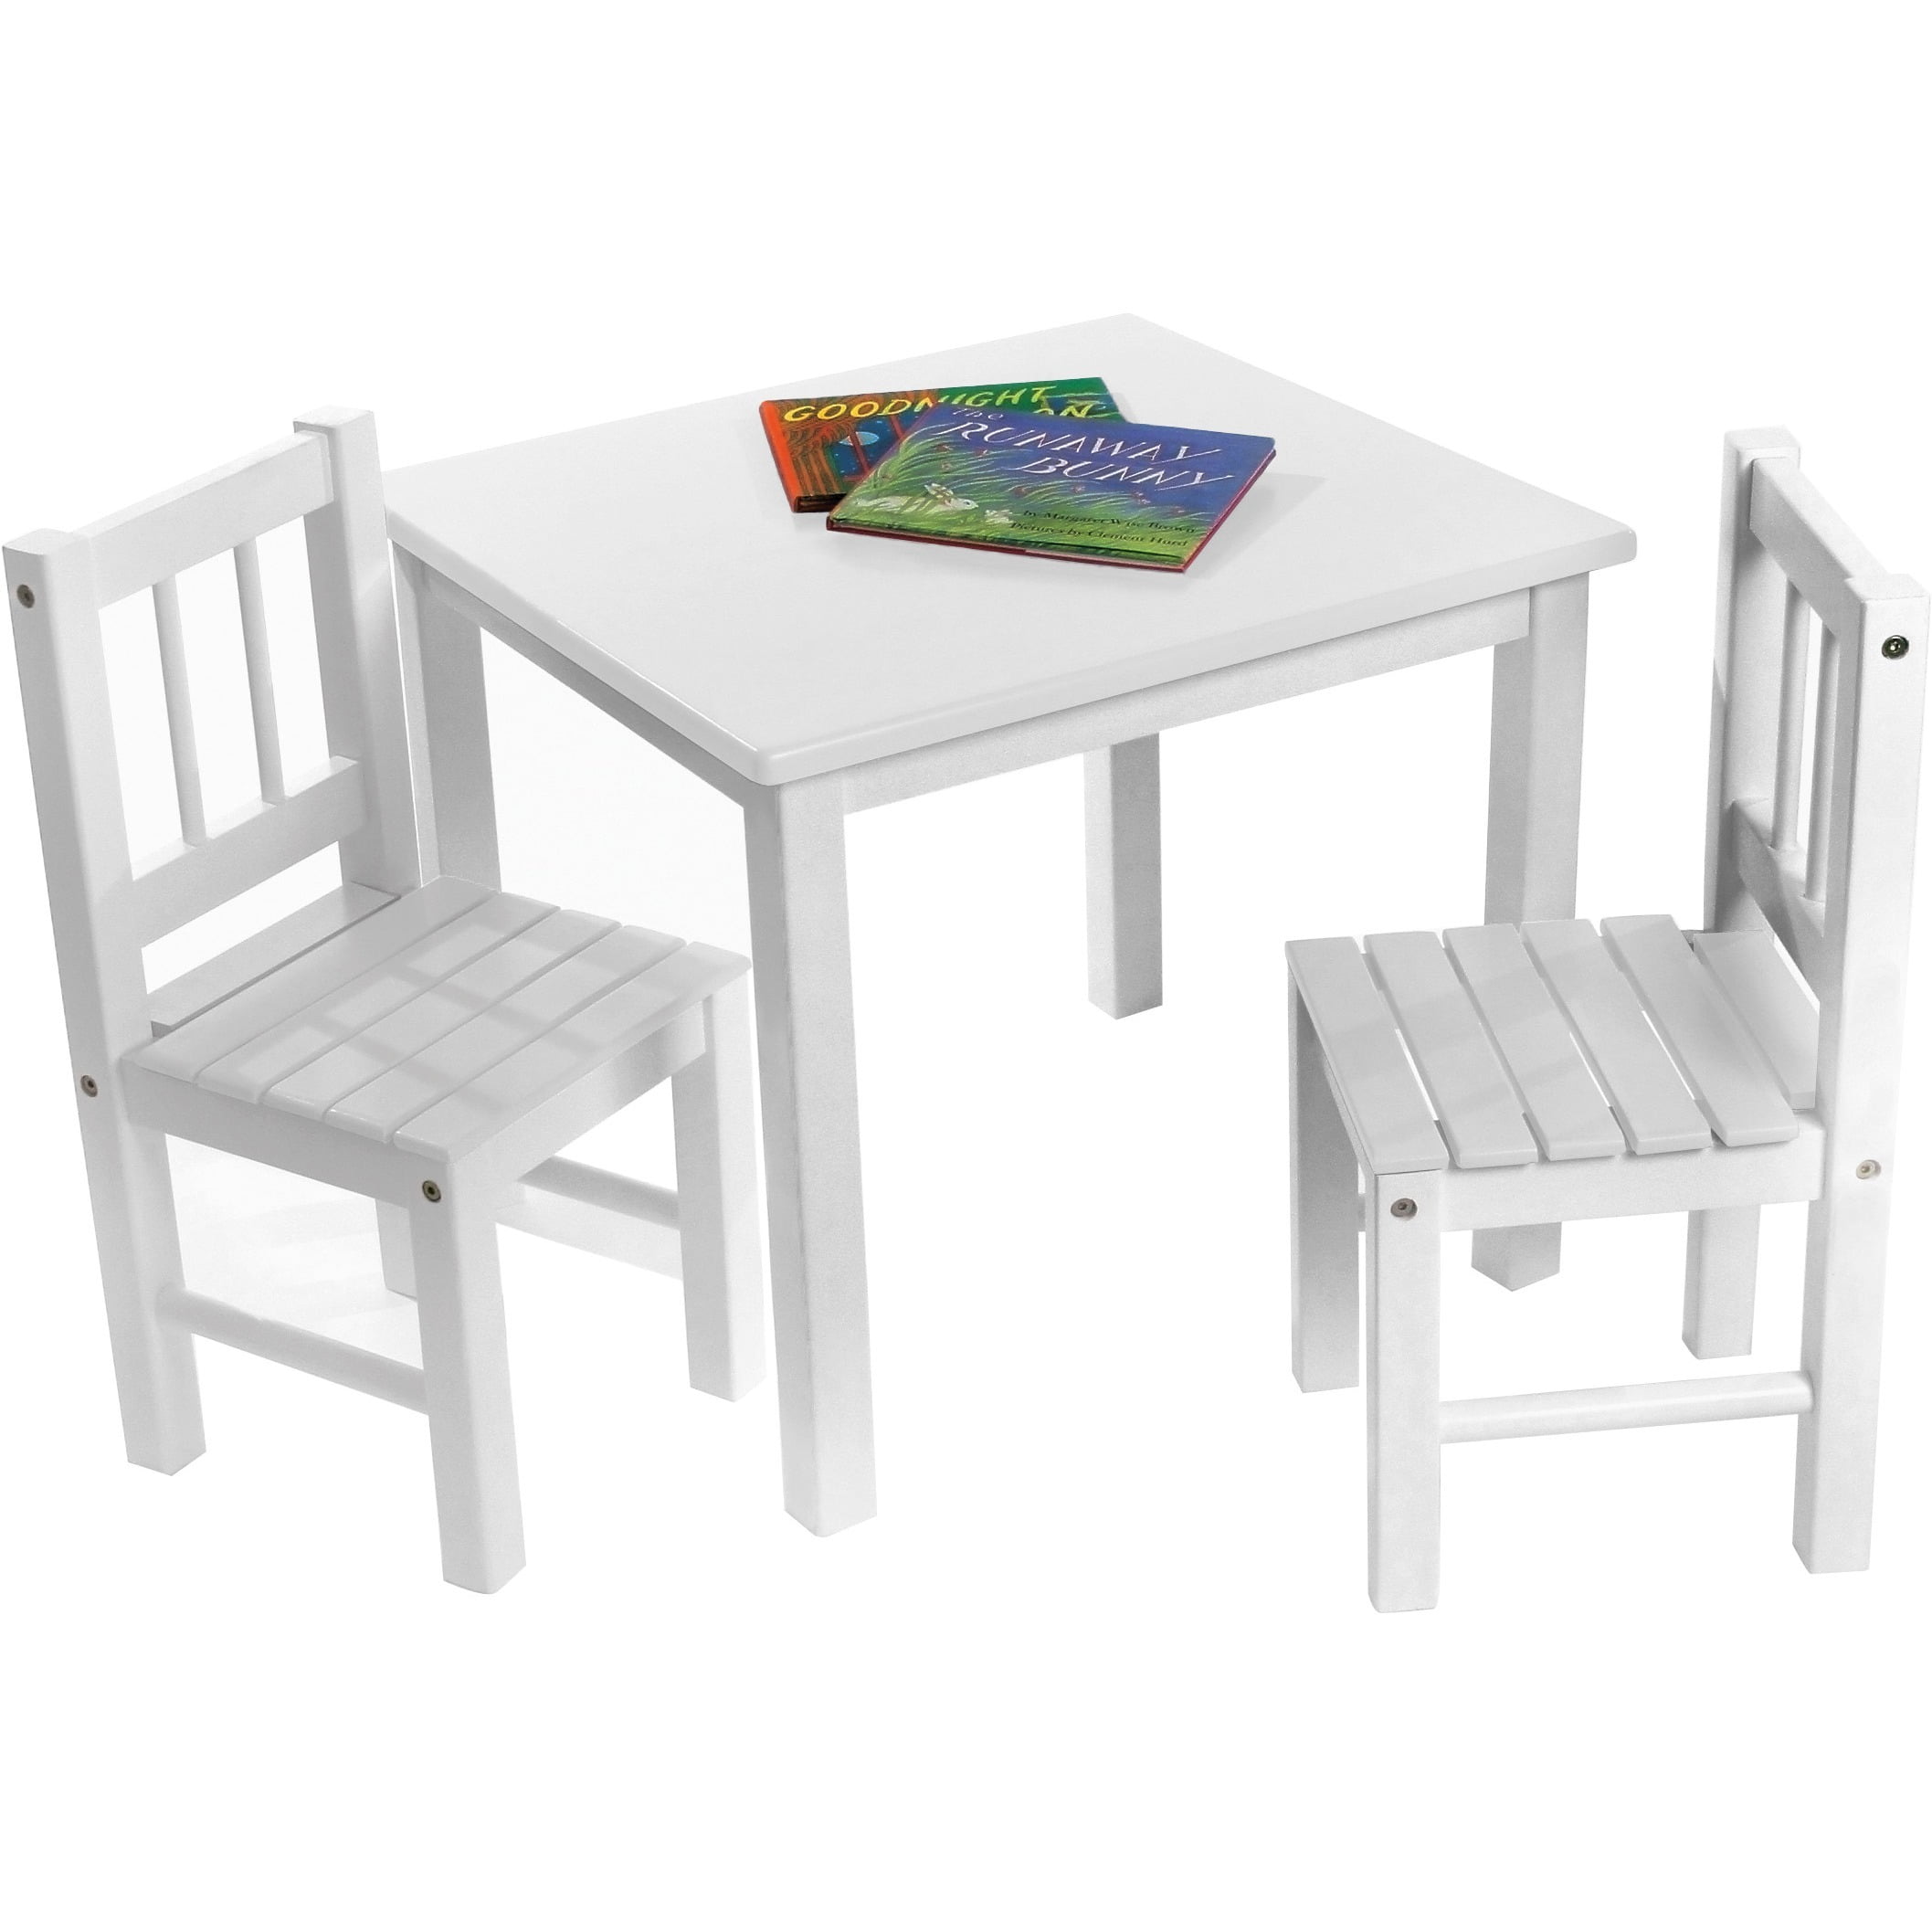 childs table and chairs